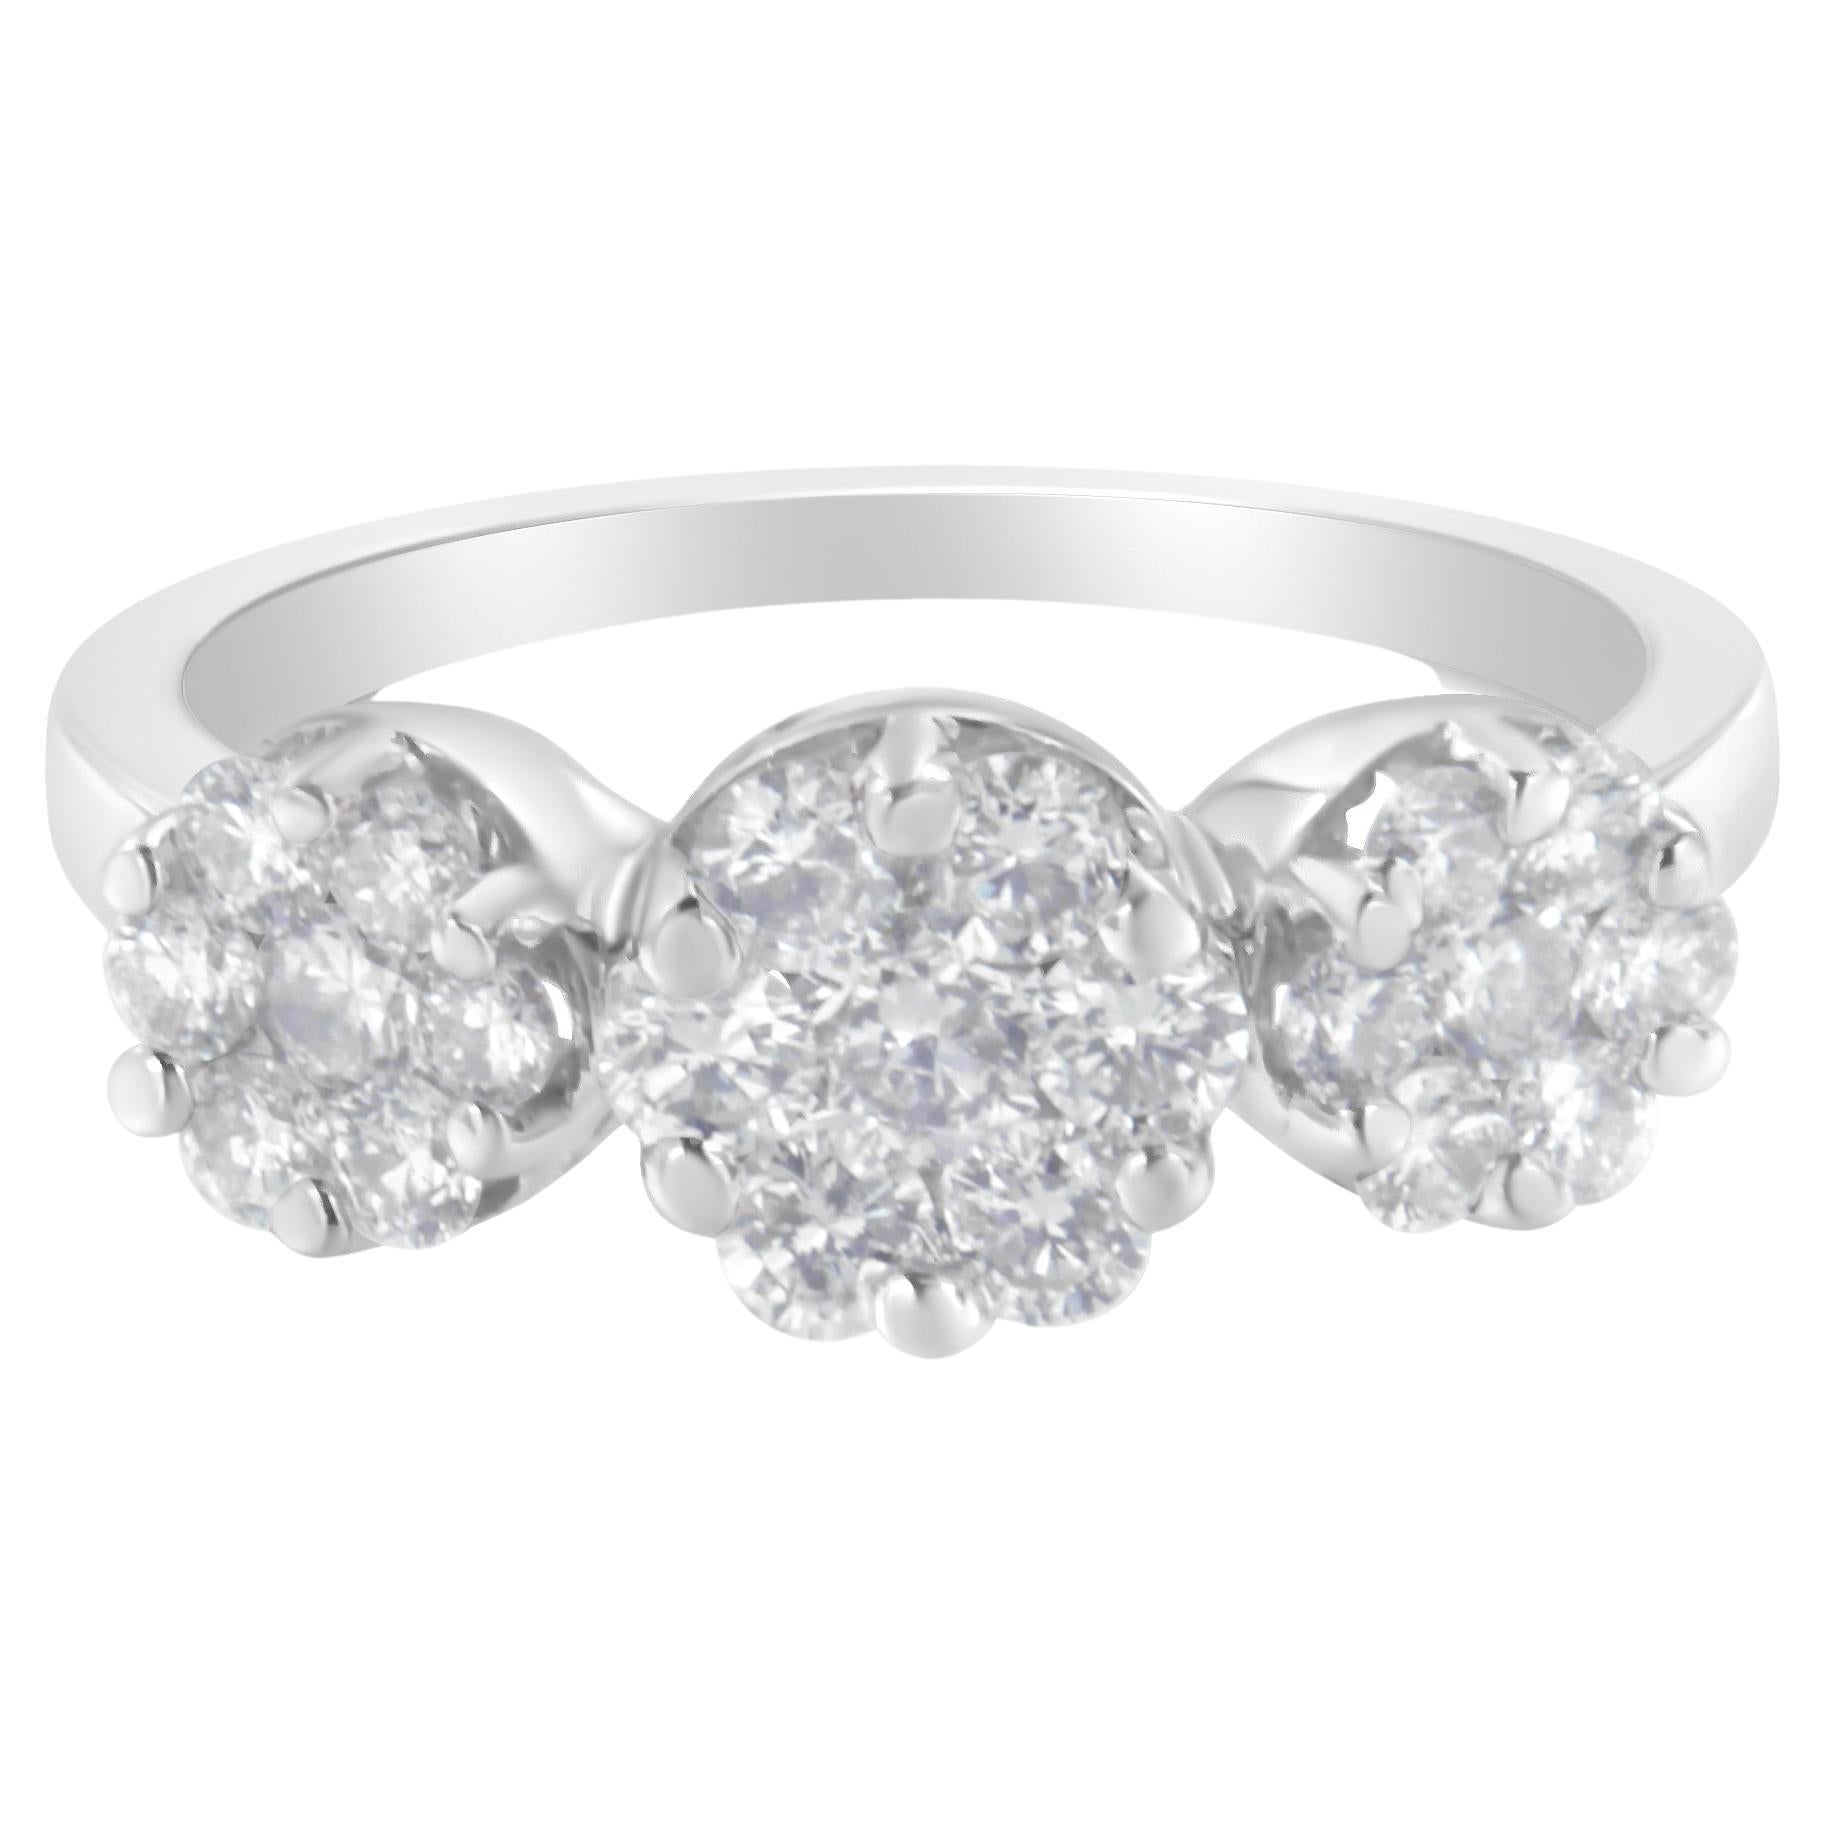 Weir Collection 18k 1.68ct Diamond Cluster Ring